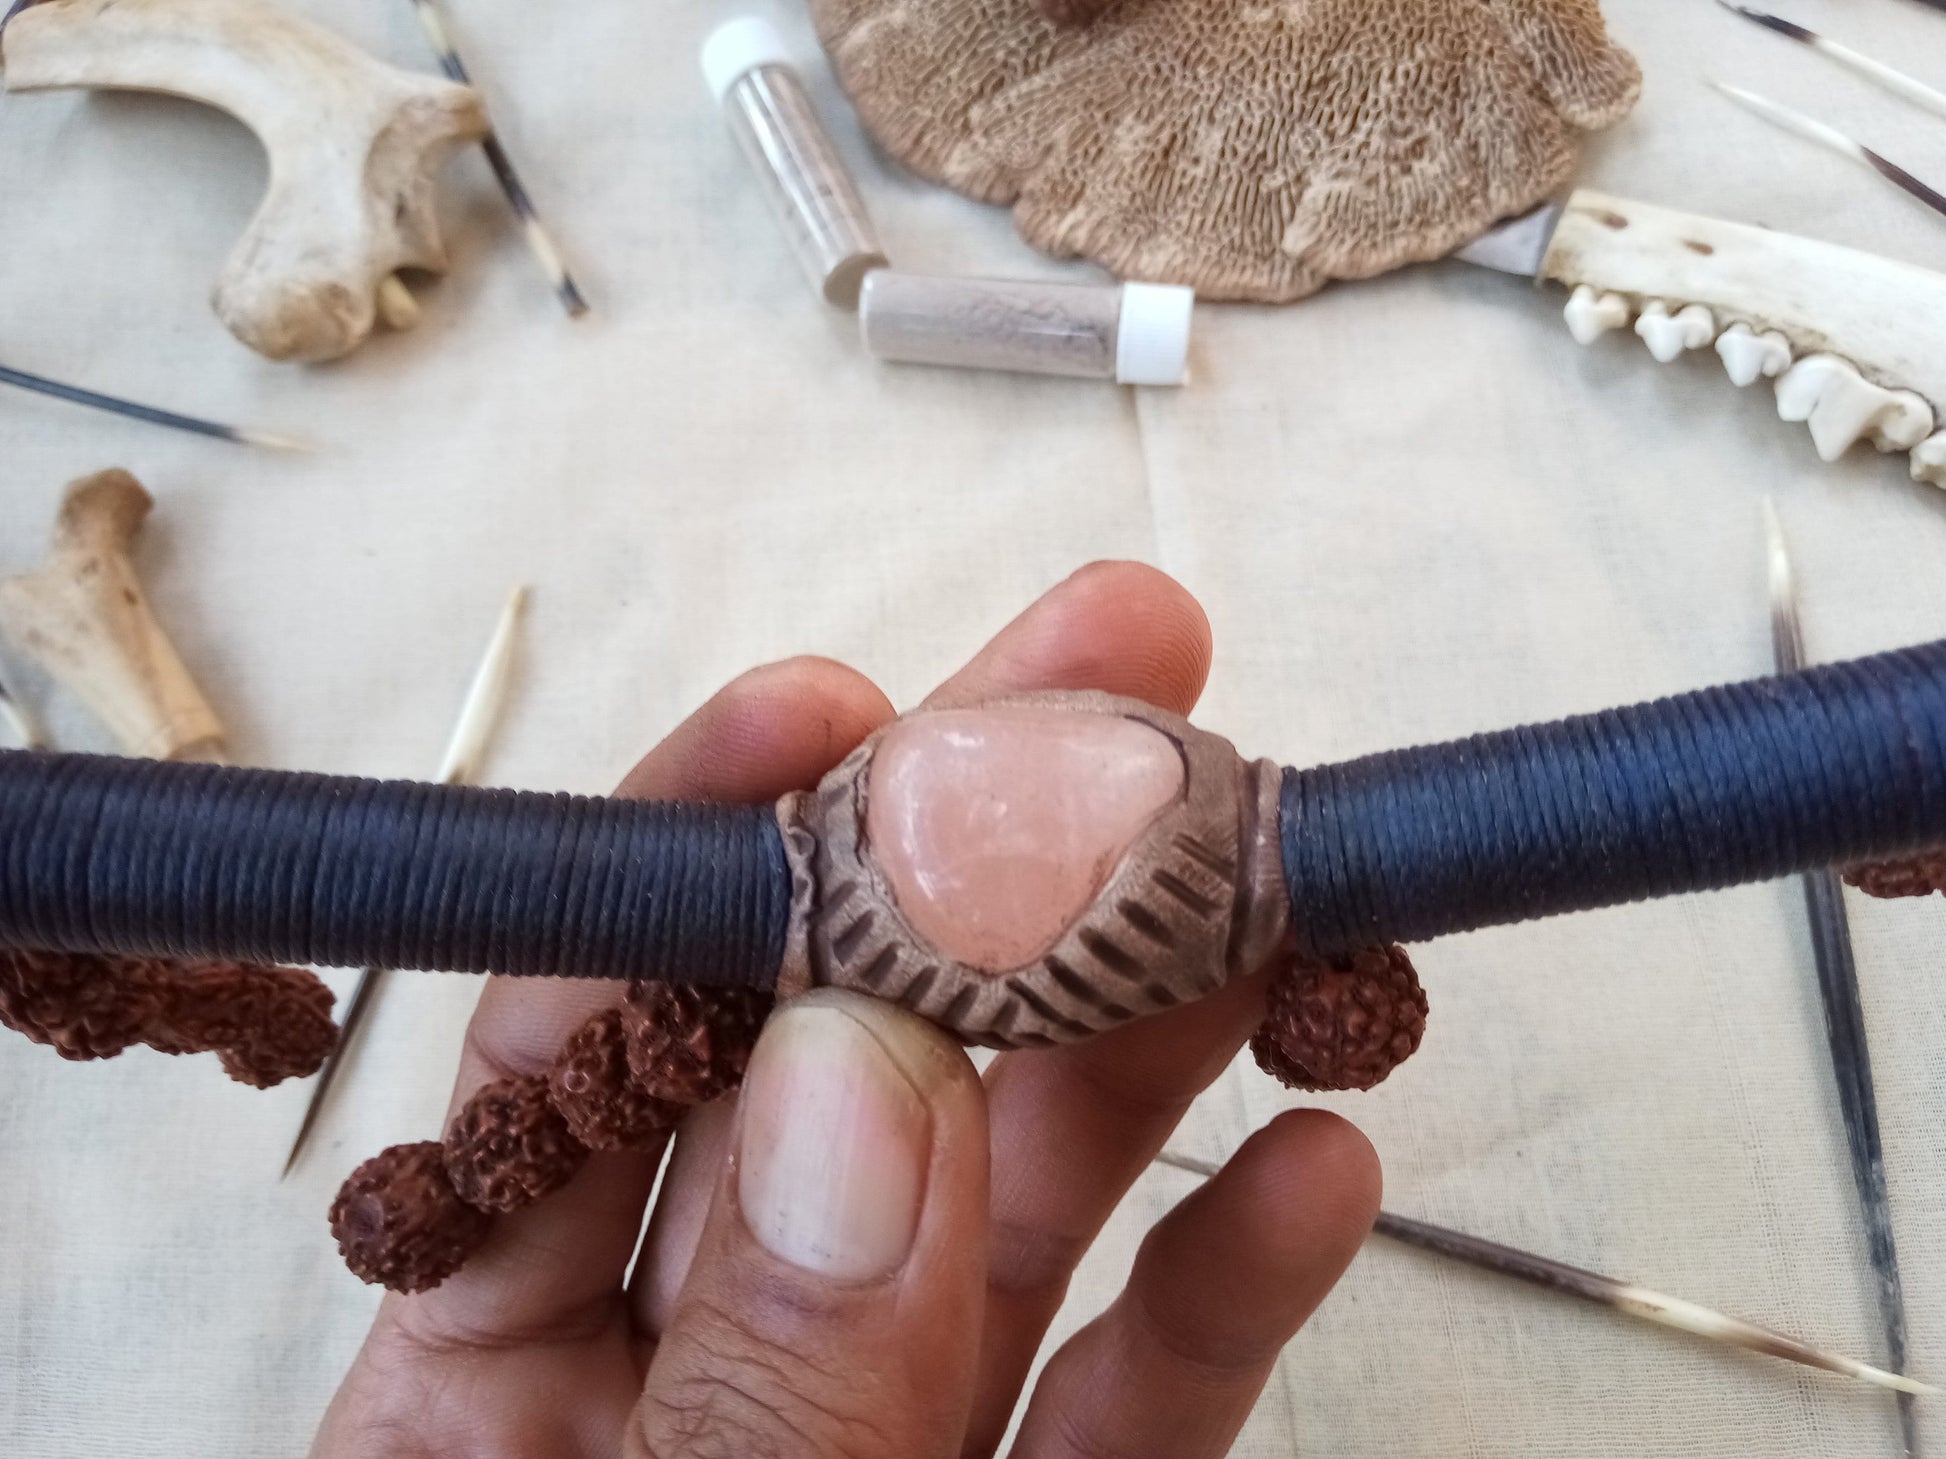 Tepi Rapè applicator - Traditionally used in Ayahuasca or Kambo ceremonies - handmade bamboo pipe with rose quartz gem and shiva rudrakshs